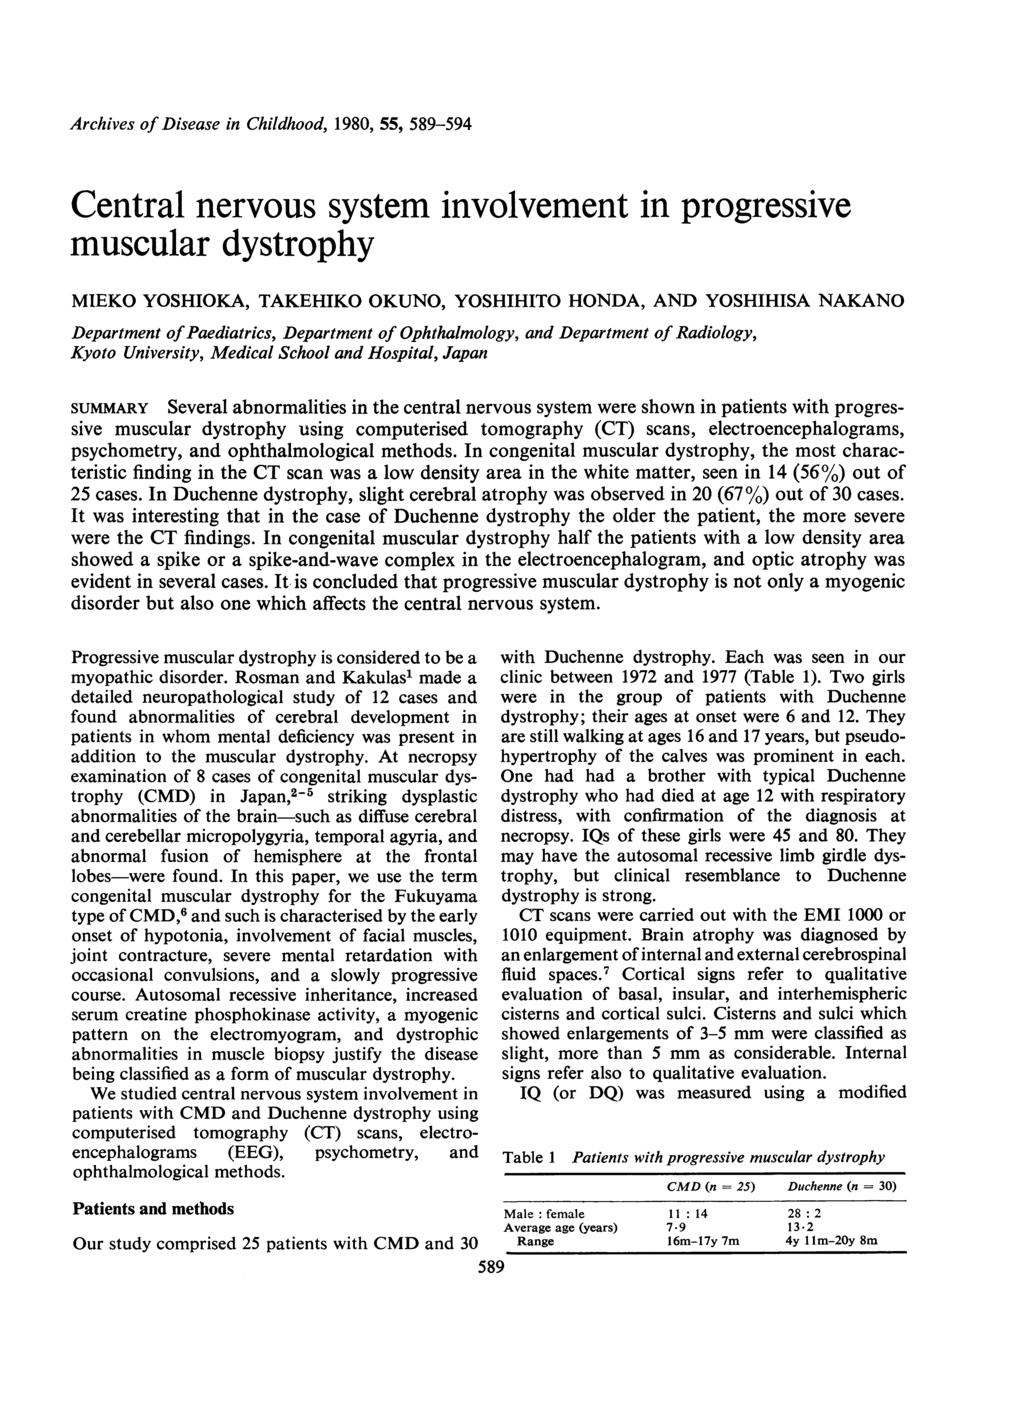 rchives of Disease in Childhood, 198, 55, 589-594 Central nervous system involvement in progressive muscular dystrophy MIEKO YOSHIOK, TKEHIKO OKUNO, YOSHIHITO HOND, ND YOSHIHIS NKNO Department of